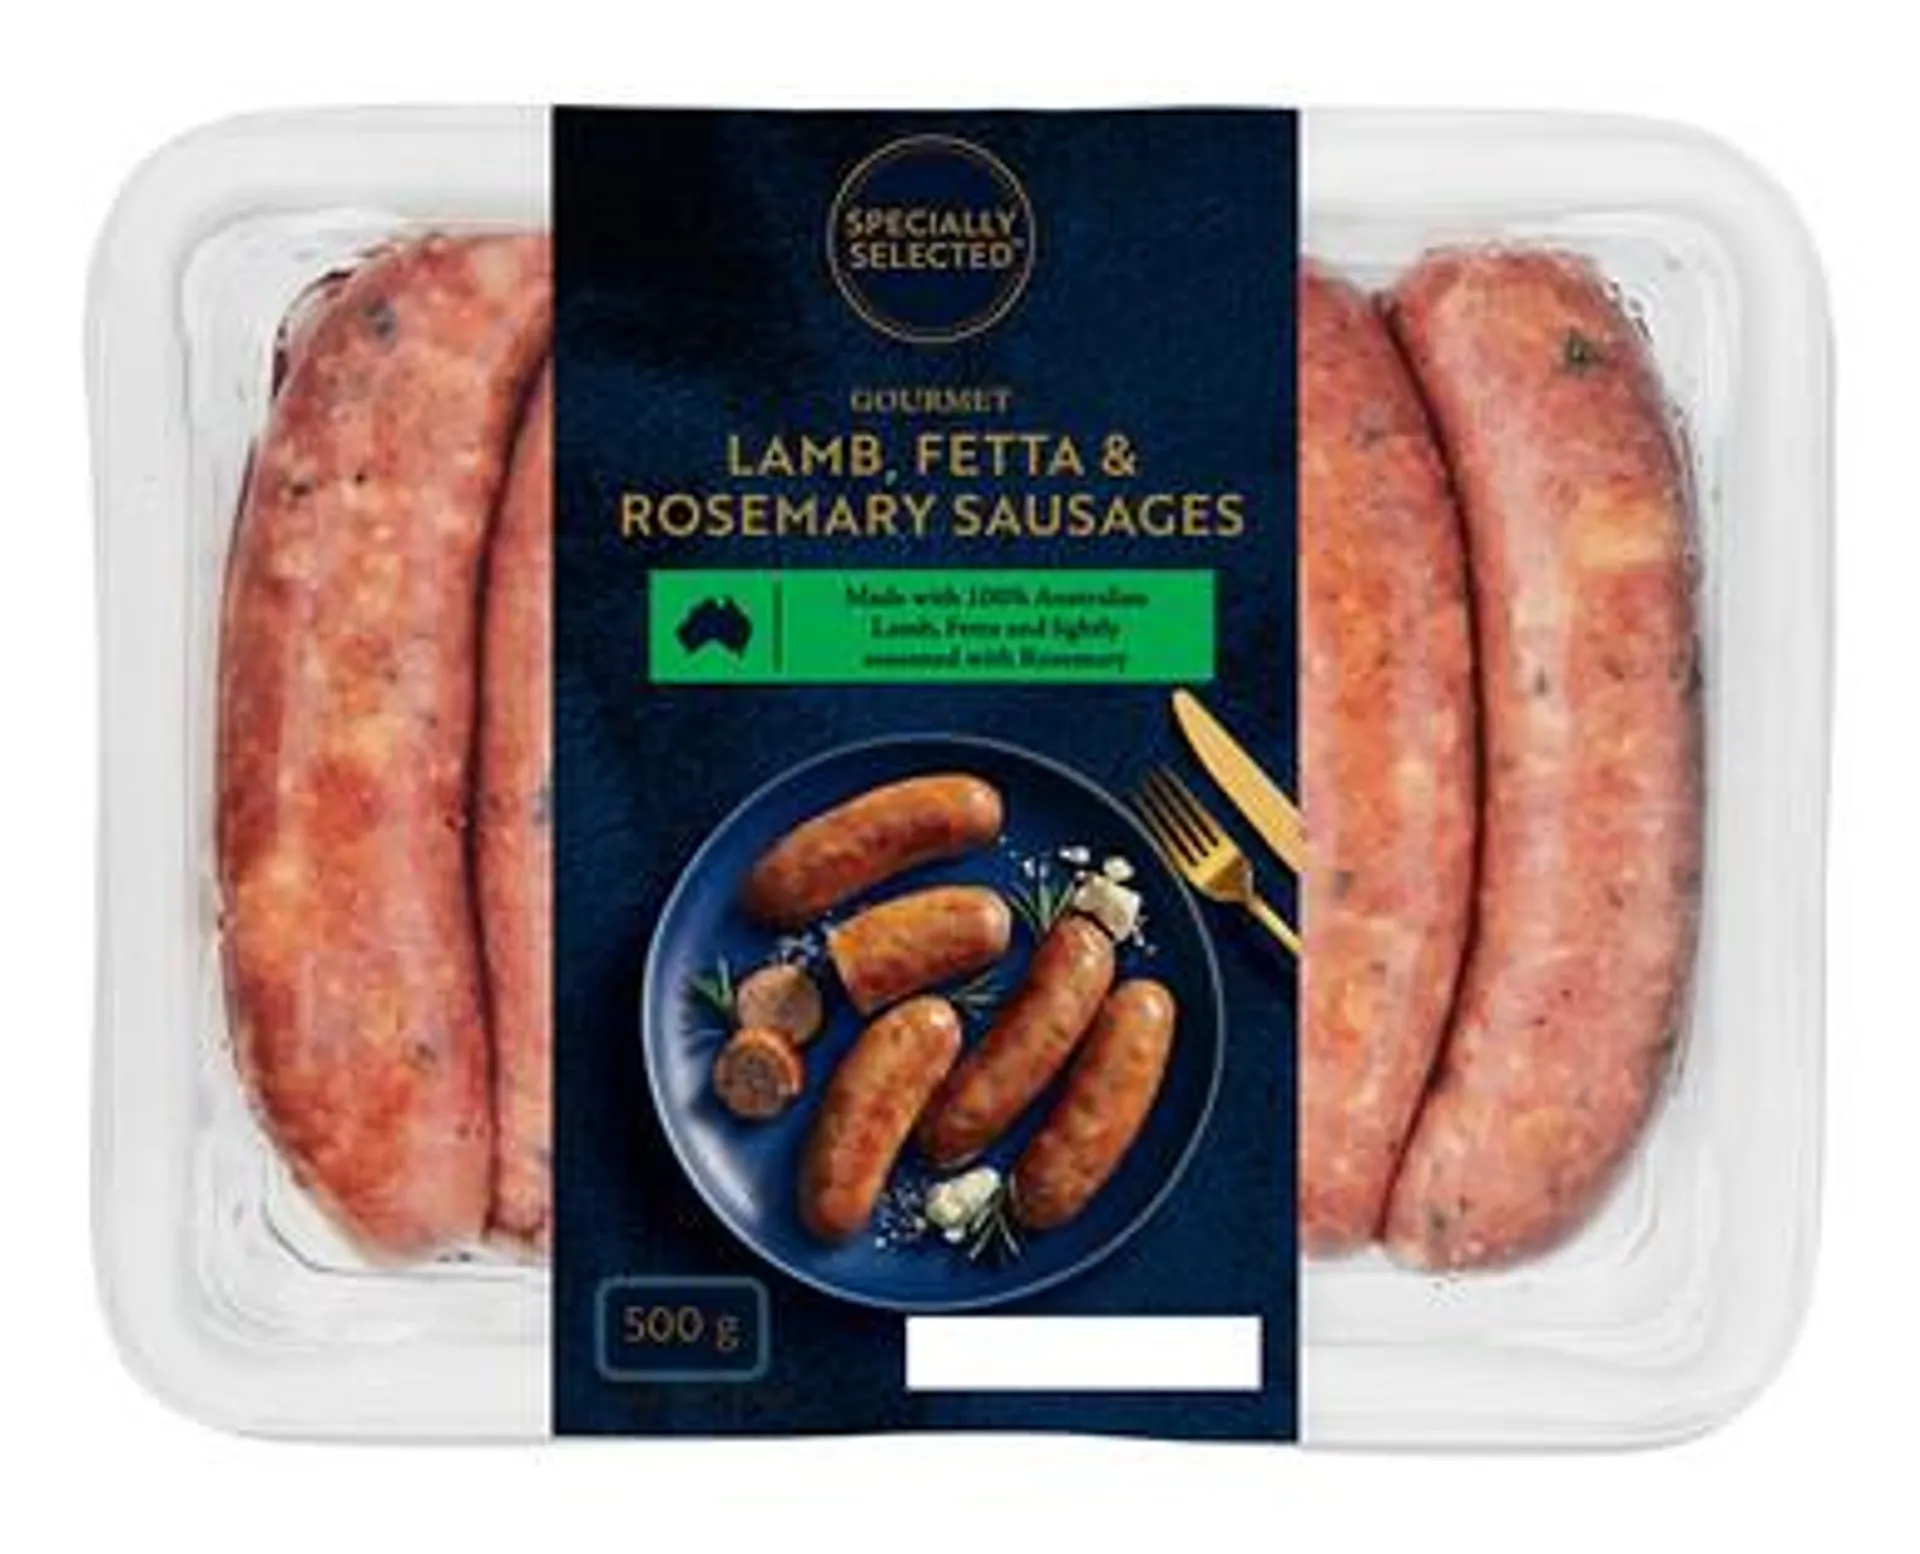 Specially Selected Lamb, Fetta & Rosemary Sausages 500g